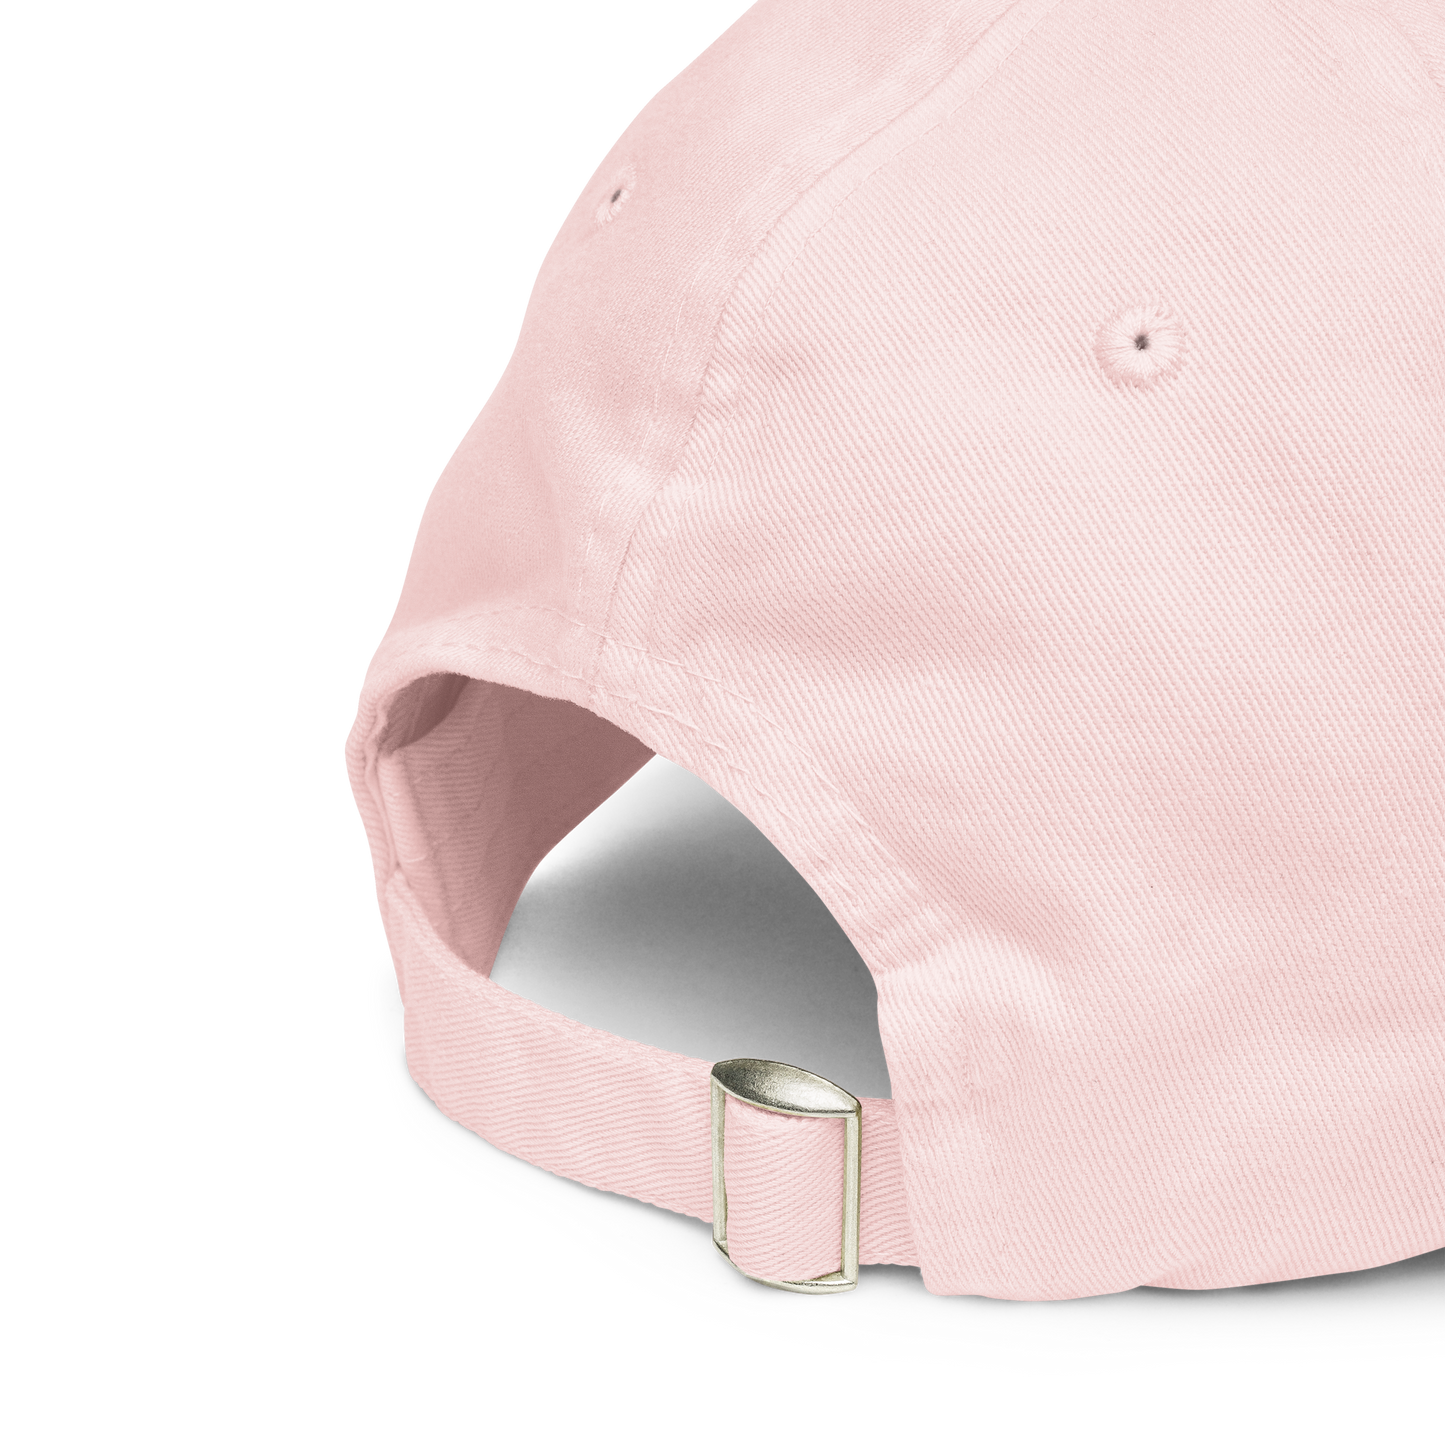 Anything You Can Do, I Can Do Bleeding Embroidered Pastel Baseball Cap